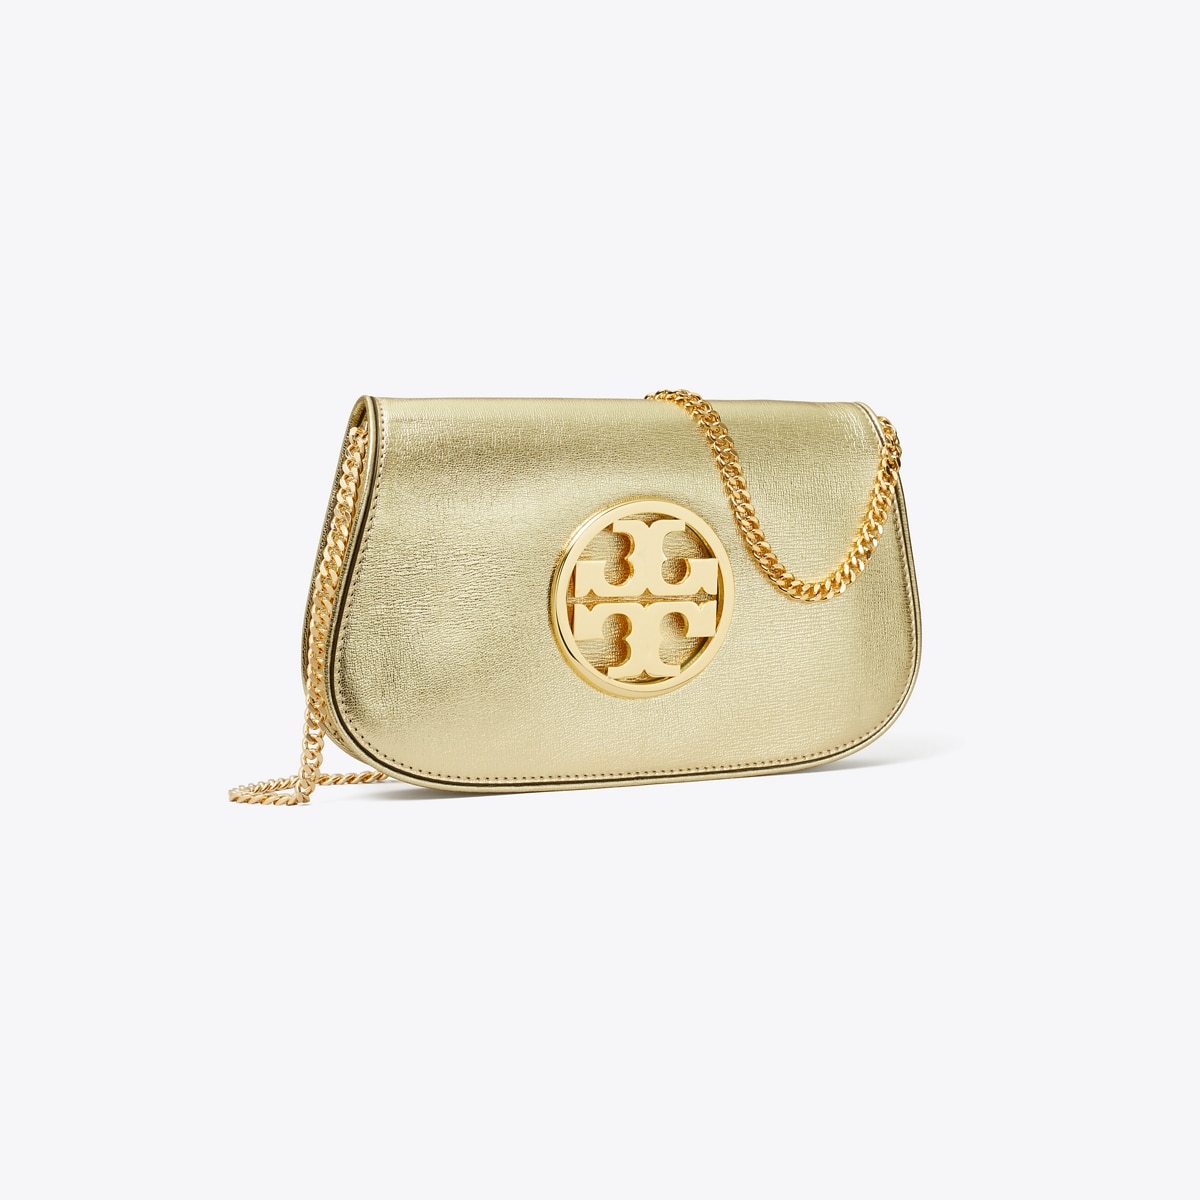 Fleming Clutch of Tory Burch - Black quilted clutch bag with flap